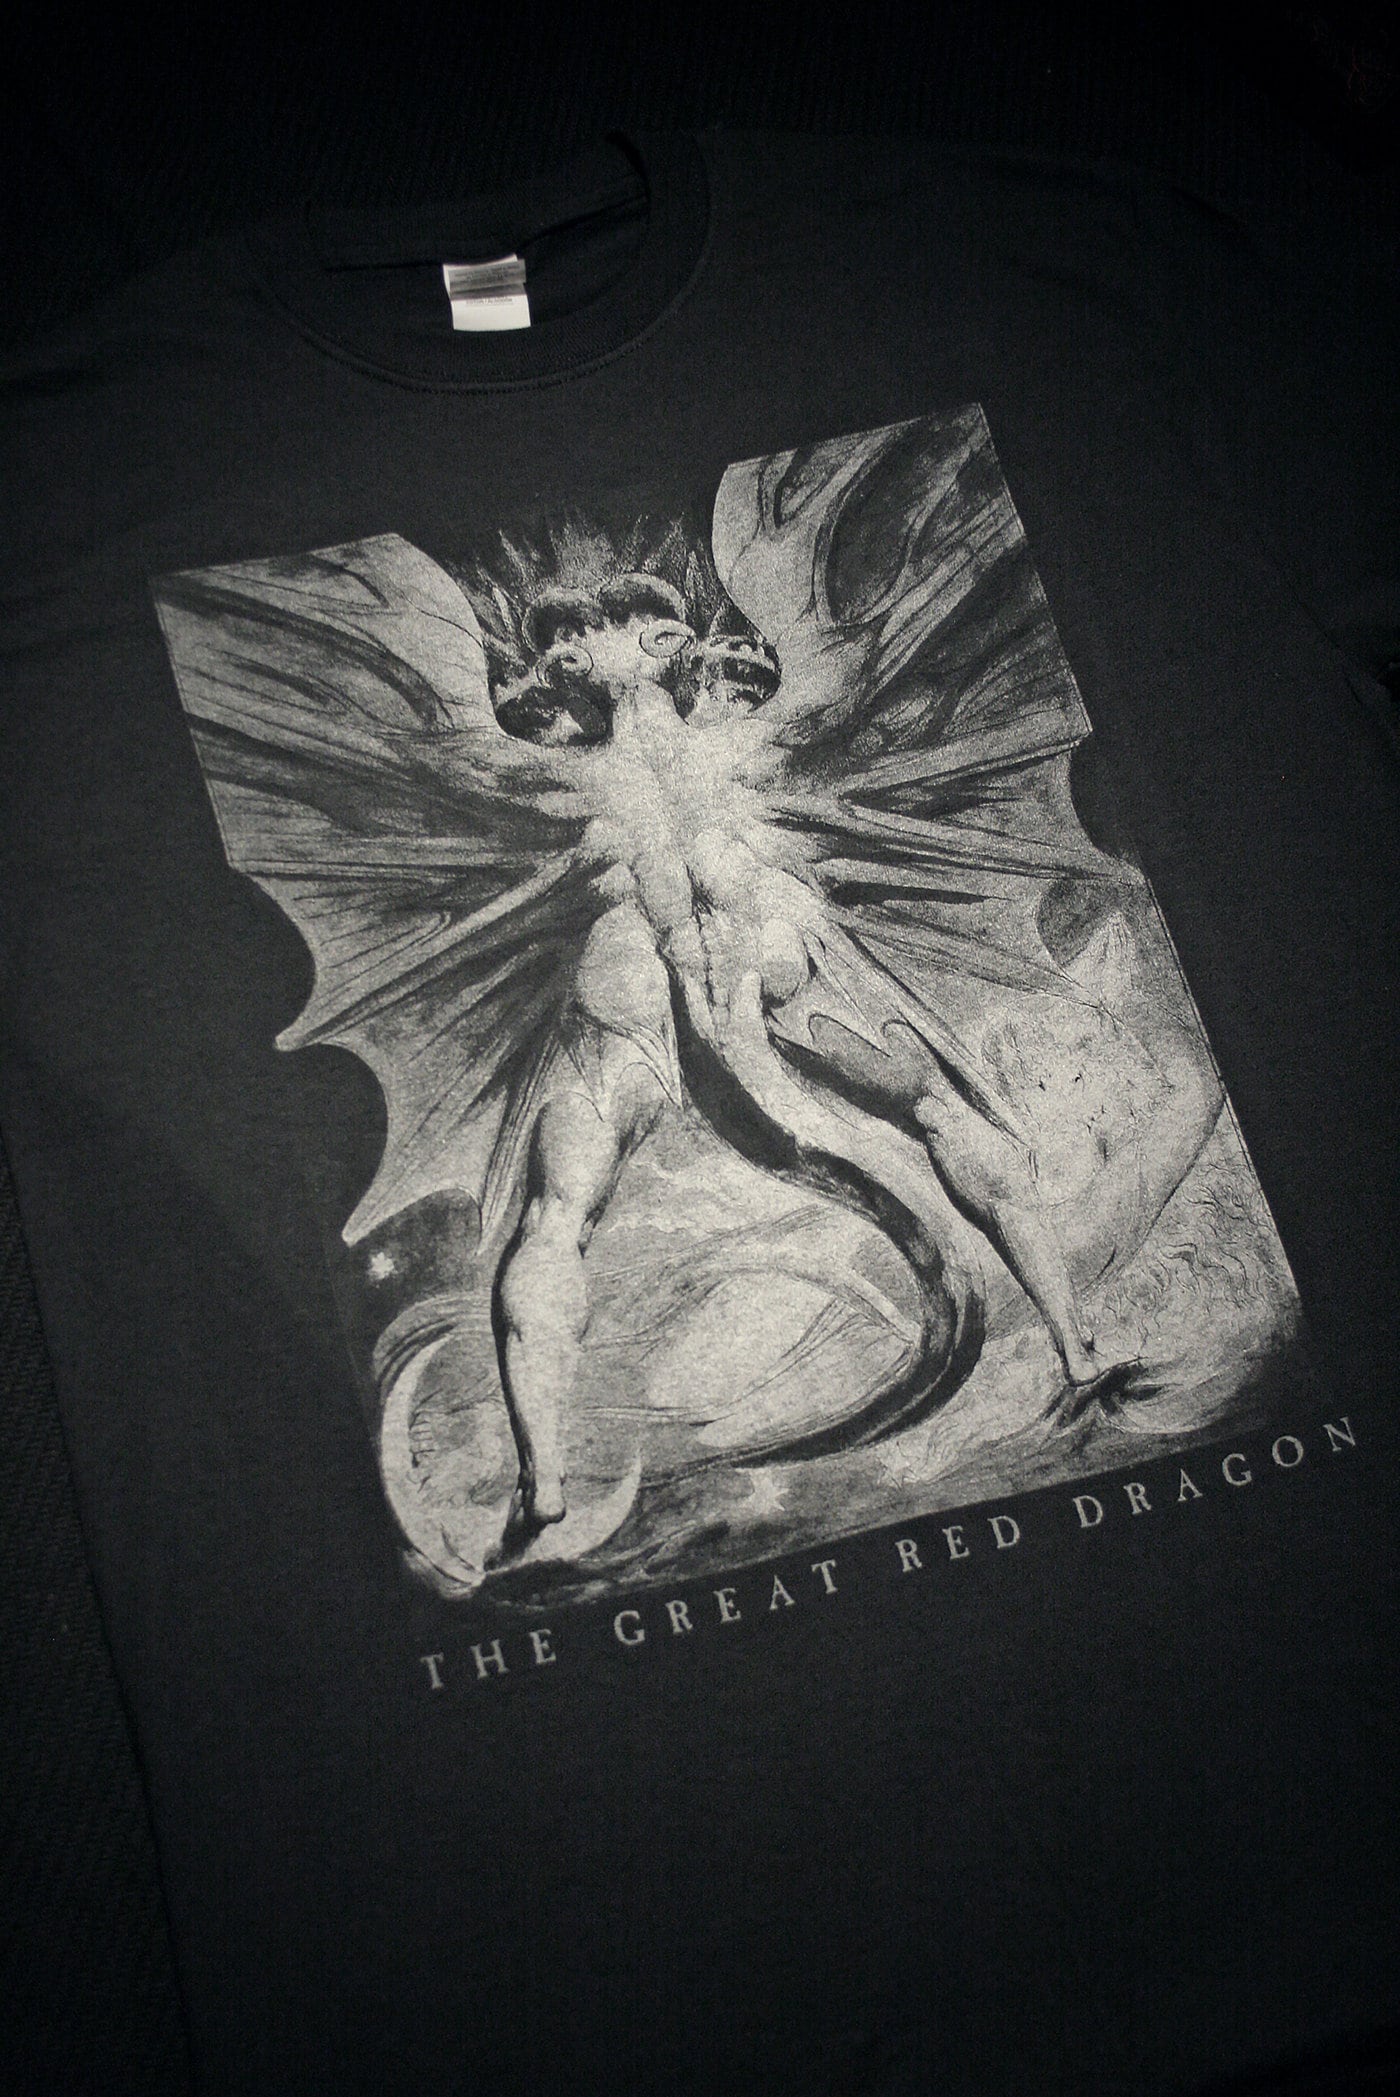 The Great Red Dragon by William Blake - T-shirt